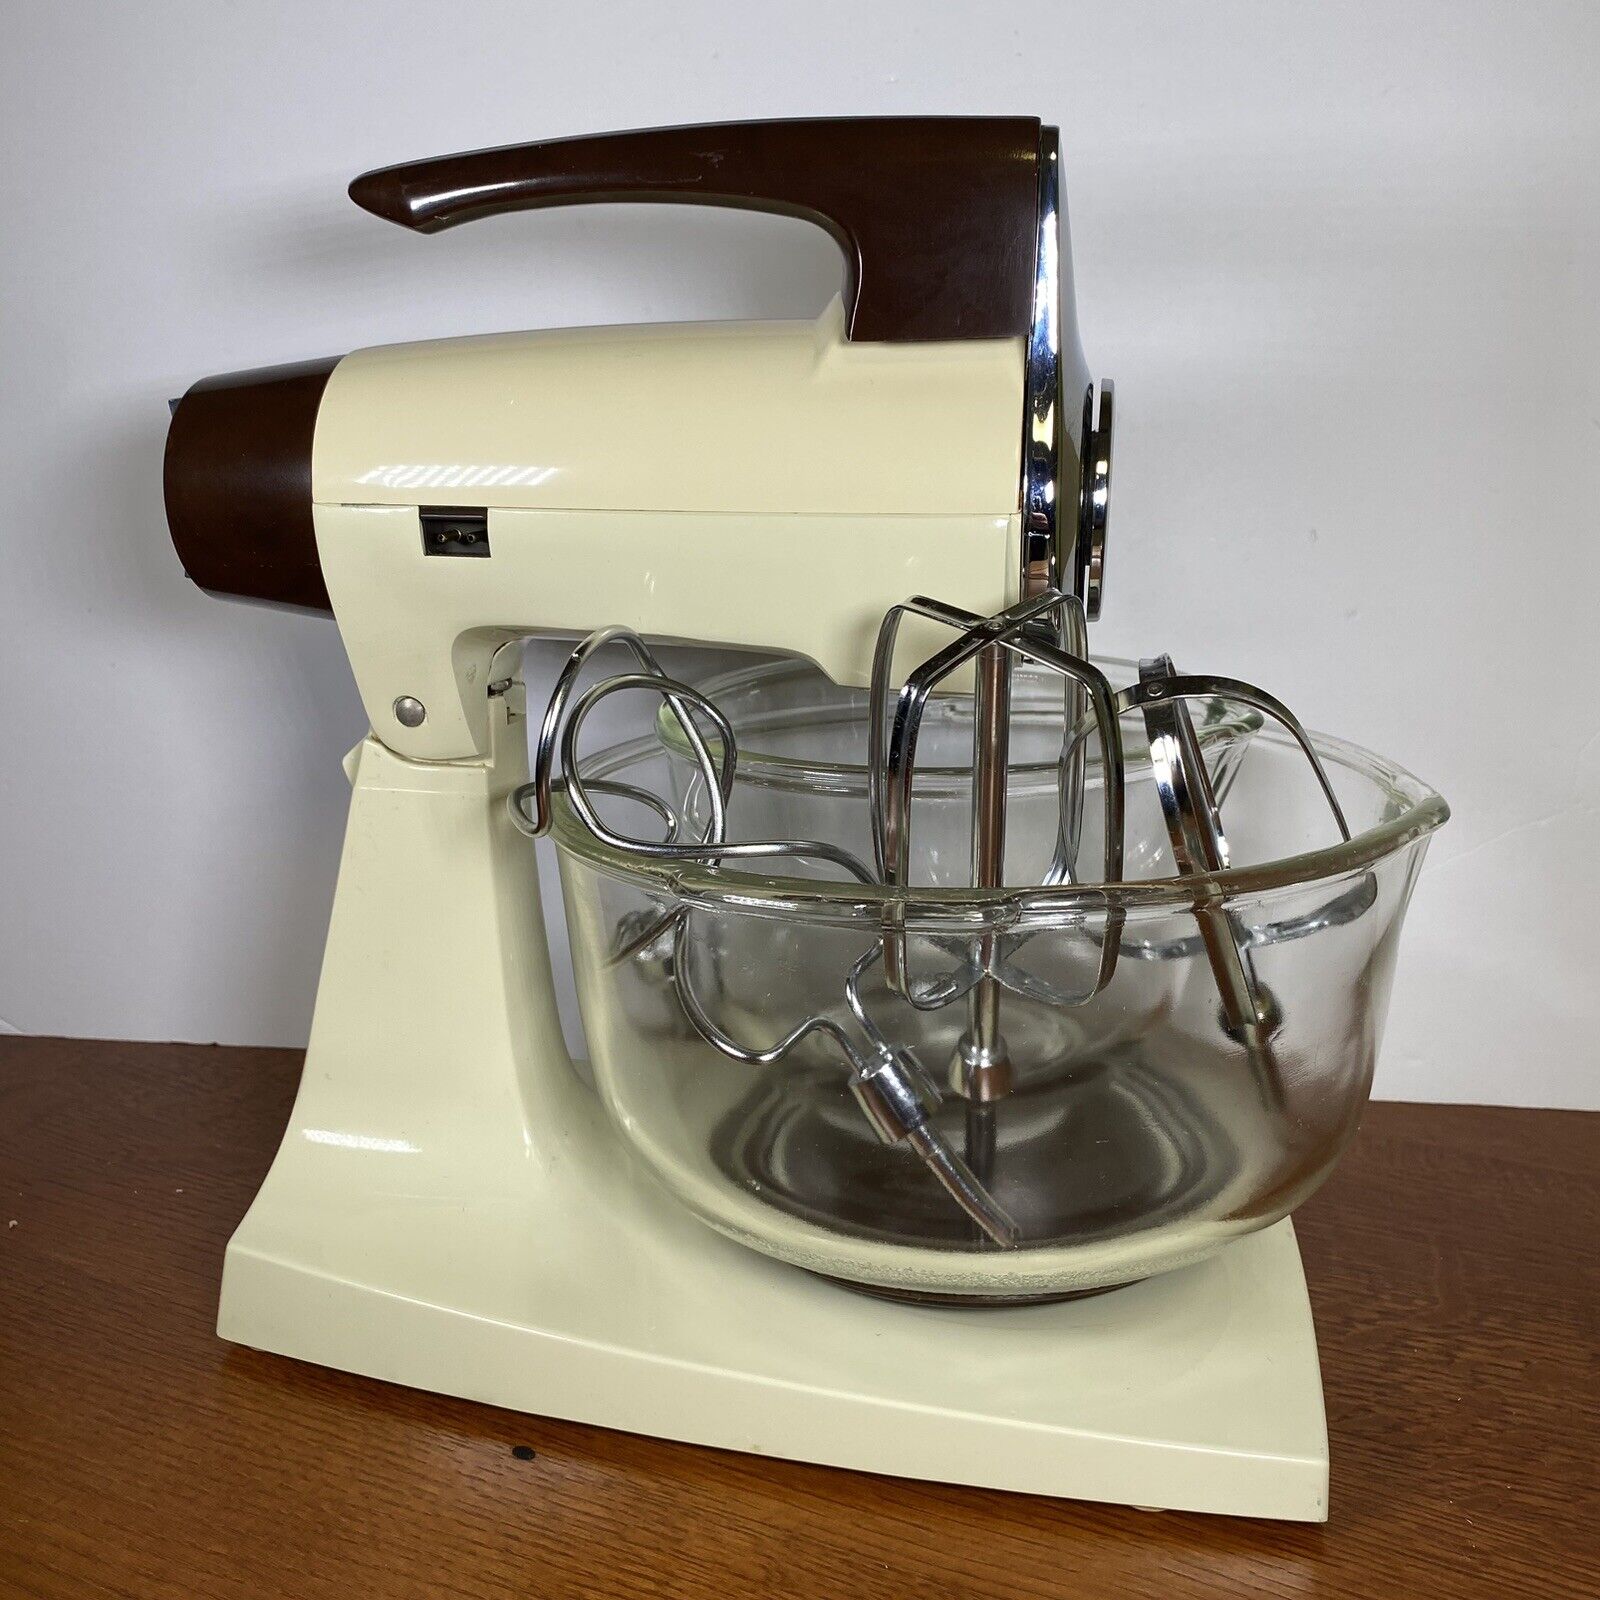 Vintage Sunbeam Mixmaster 12 Speed Blender w/2 Mixing Glass Bowls & Beaters